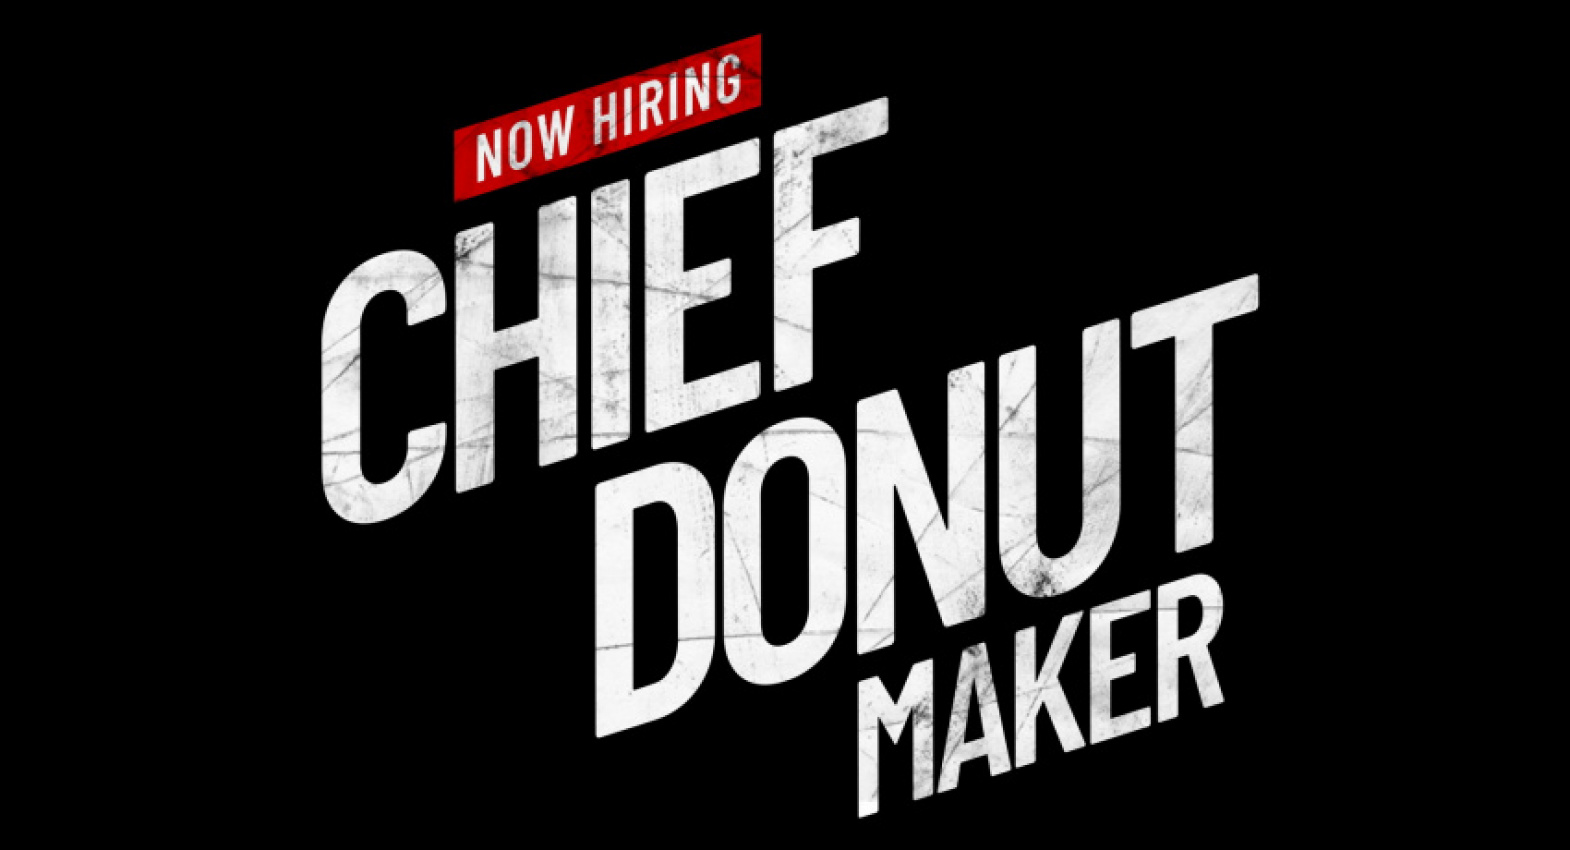 autos, cars, dodge, news, dodge videos, hellcat, offbeat news, video, dodge is officially accepting resumes for $150,000 a year chief donut maker job